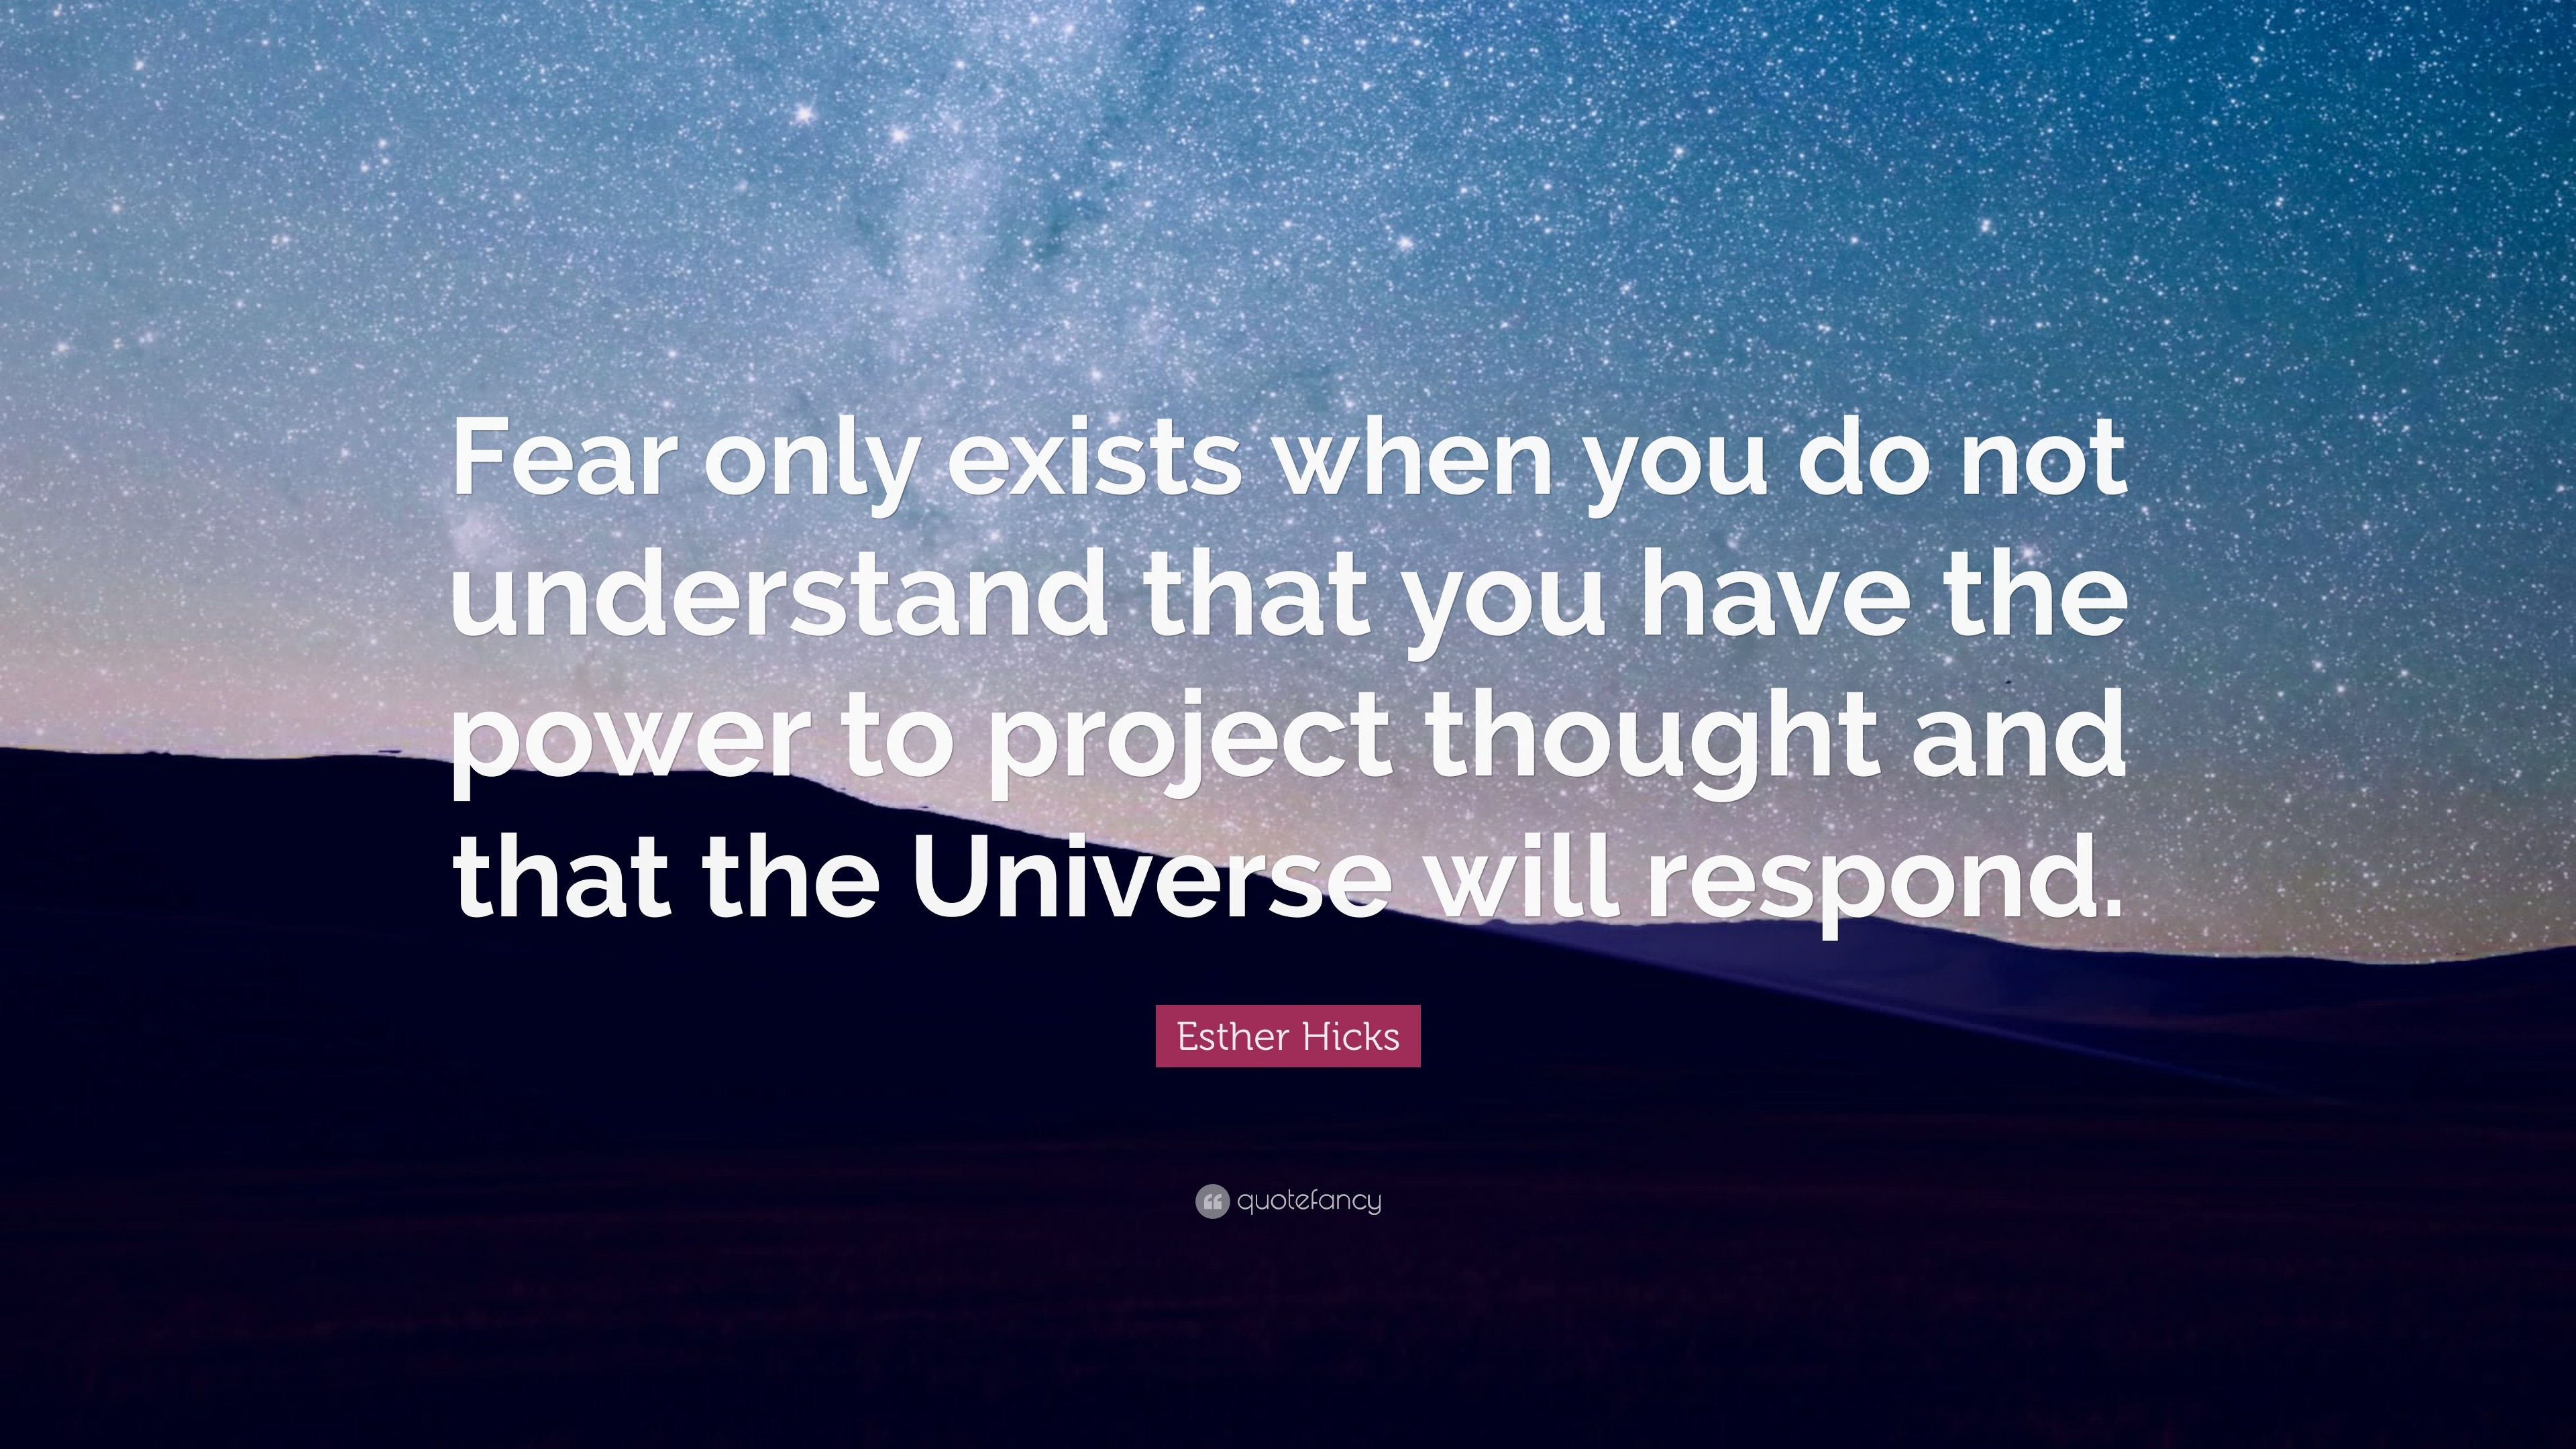 Esther Hicks Quote: “Fear only exists when you do not understand that you  have the power to project thought and that the Universe will respon...”